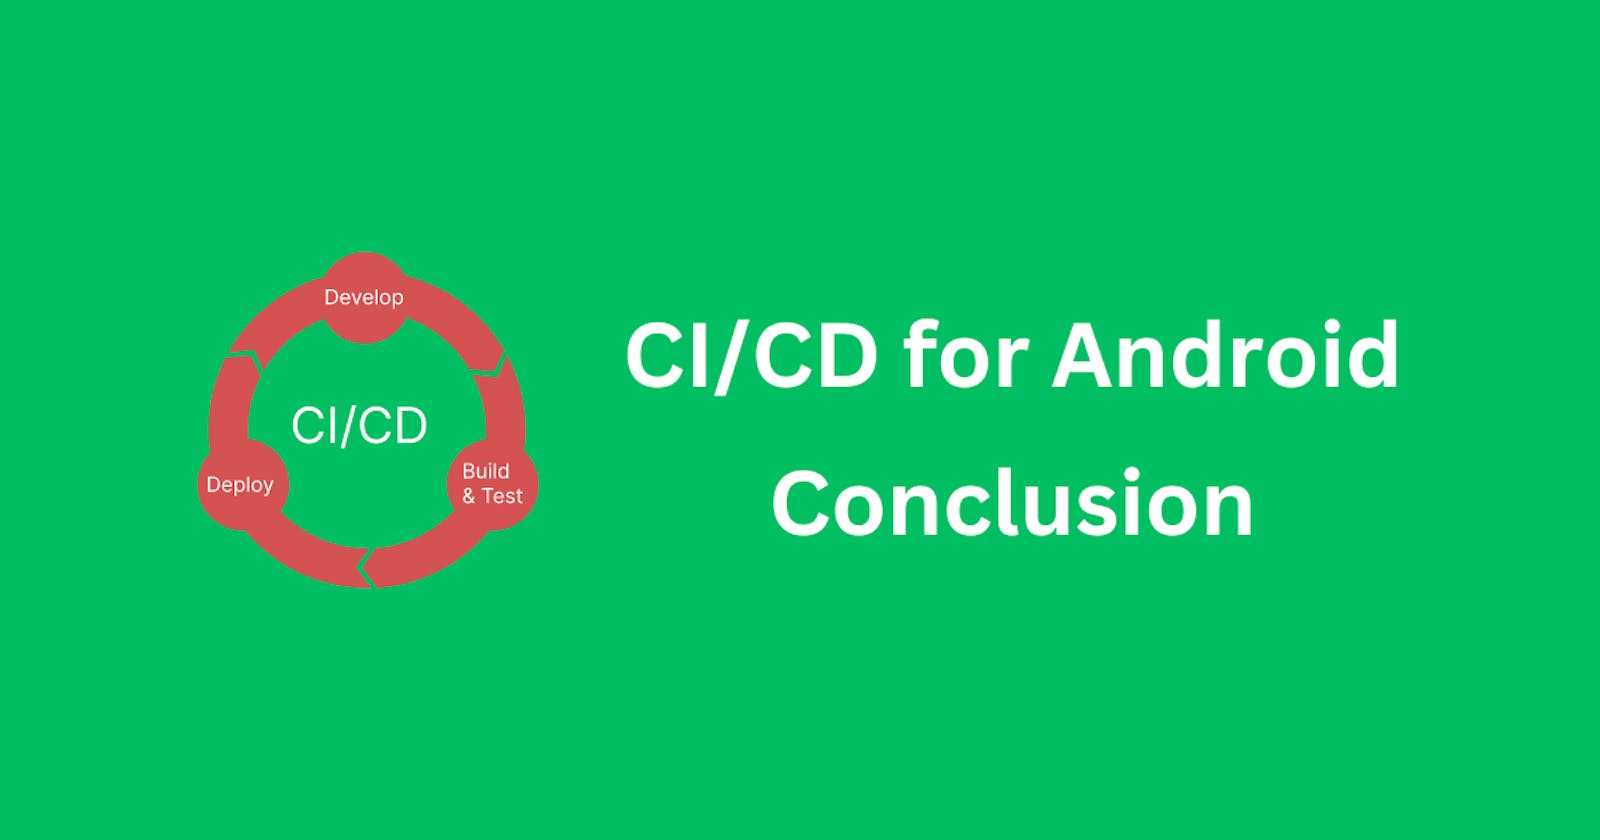 CI/CD for Android - Conclusion